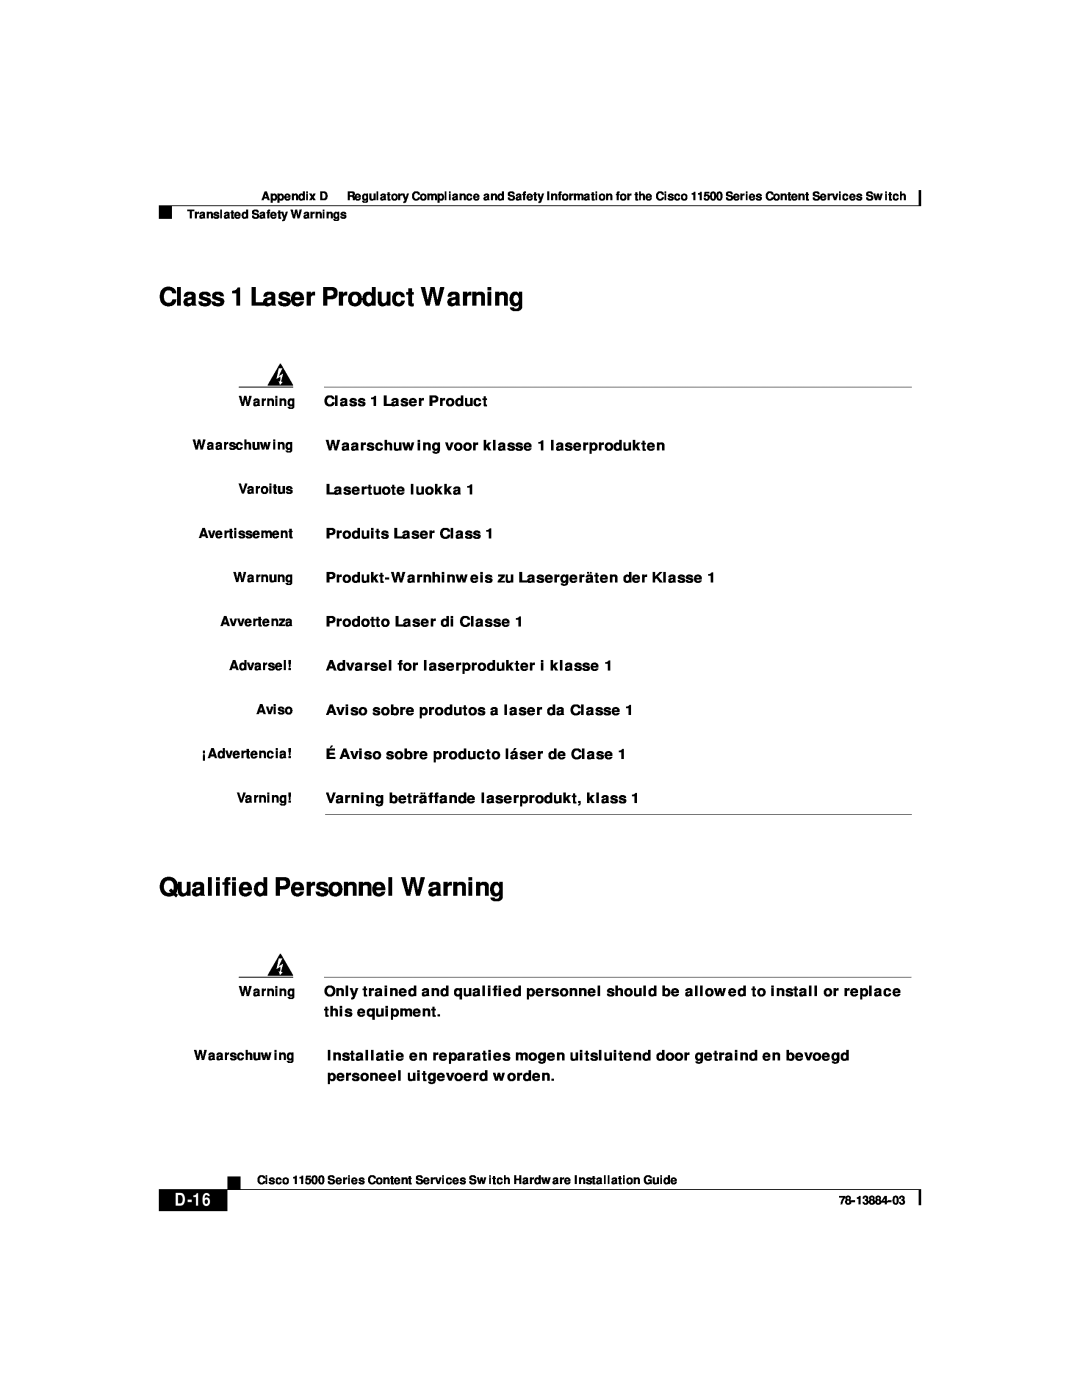 Cisco Systems 11500 Series manual Class 1 Laser Product Warning, Qualified Personnel Warning, D-16 